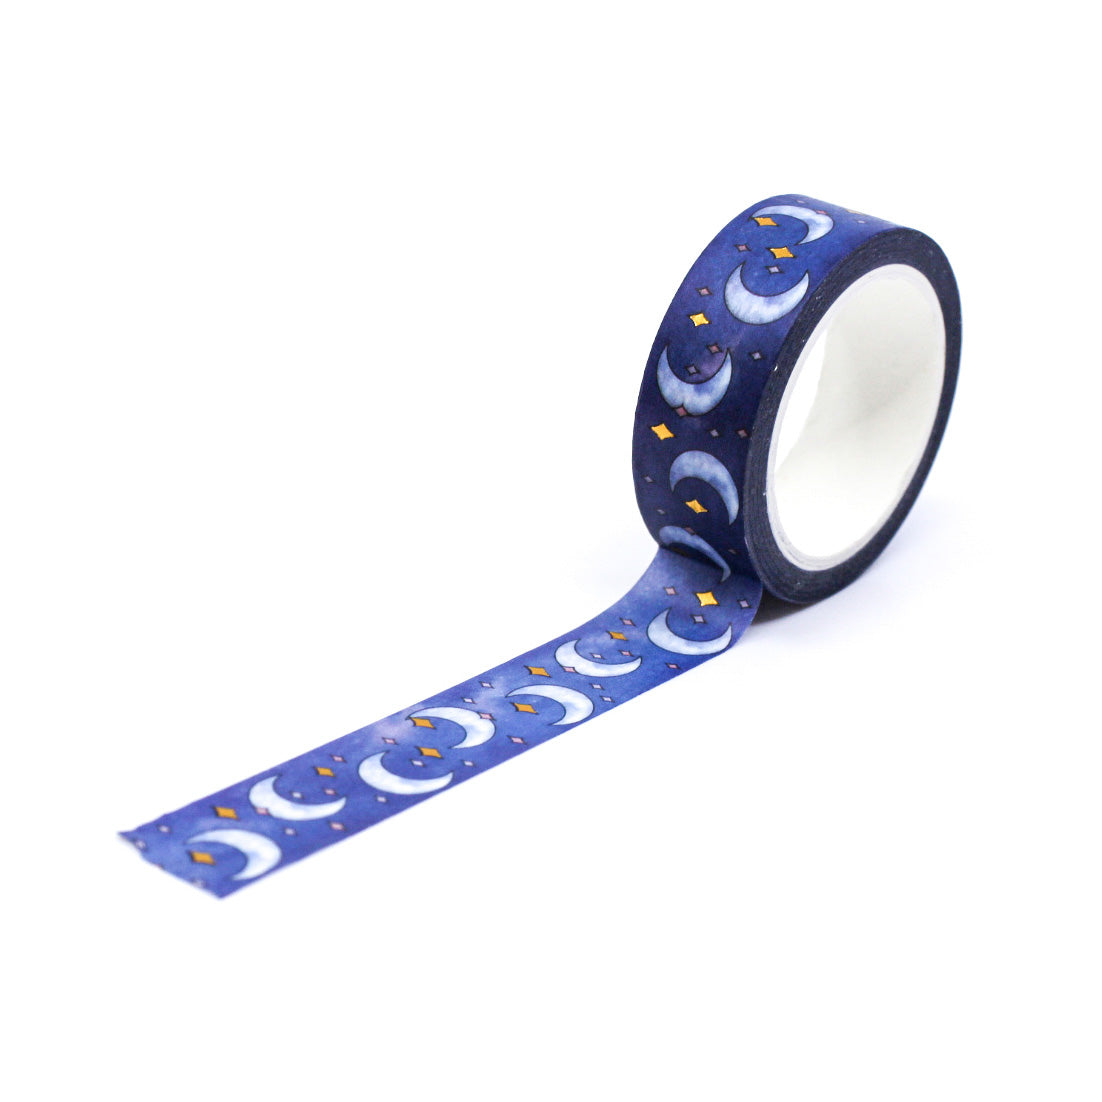 Add an aura of mystique with our Mystical Symbols Crescent Moon Washi Tape, featuring enchanting moon and symbolic designs. Perfect for crafting a magical atmosphere. This tape is sold at BBB Supplies Craft Shop.